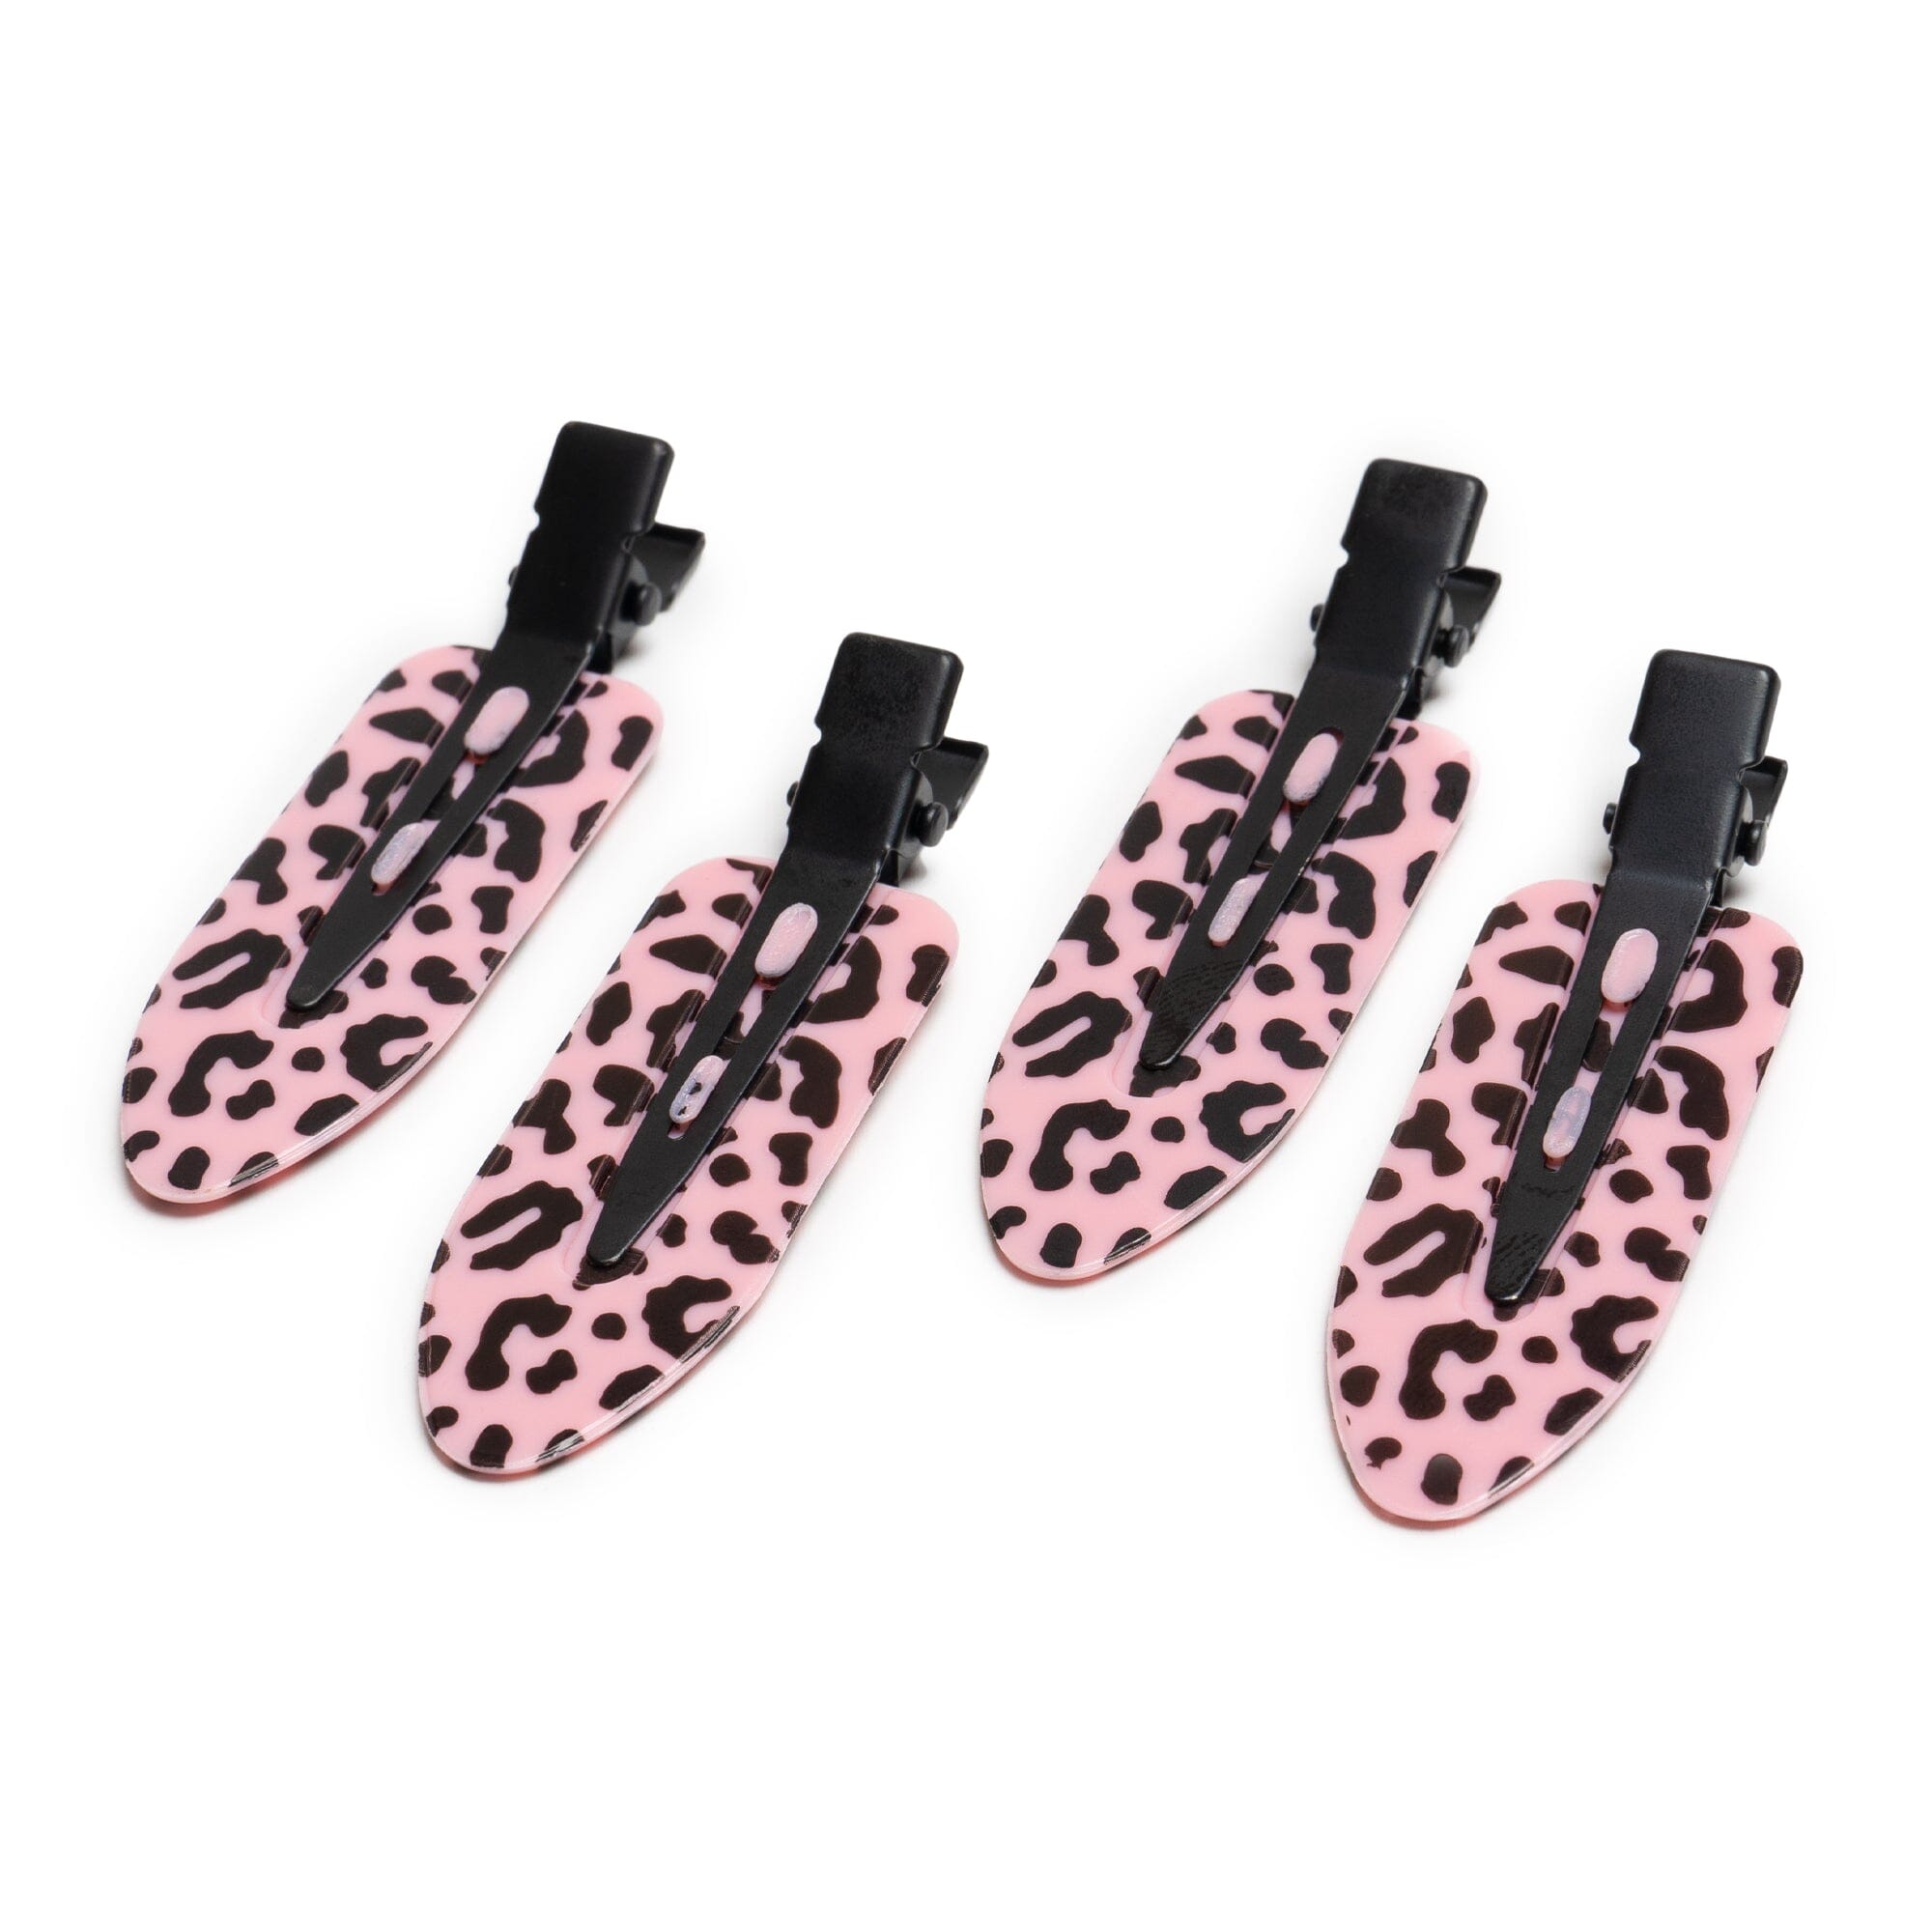 Leopard smooth clips x 4 (7040118456515)